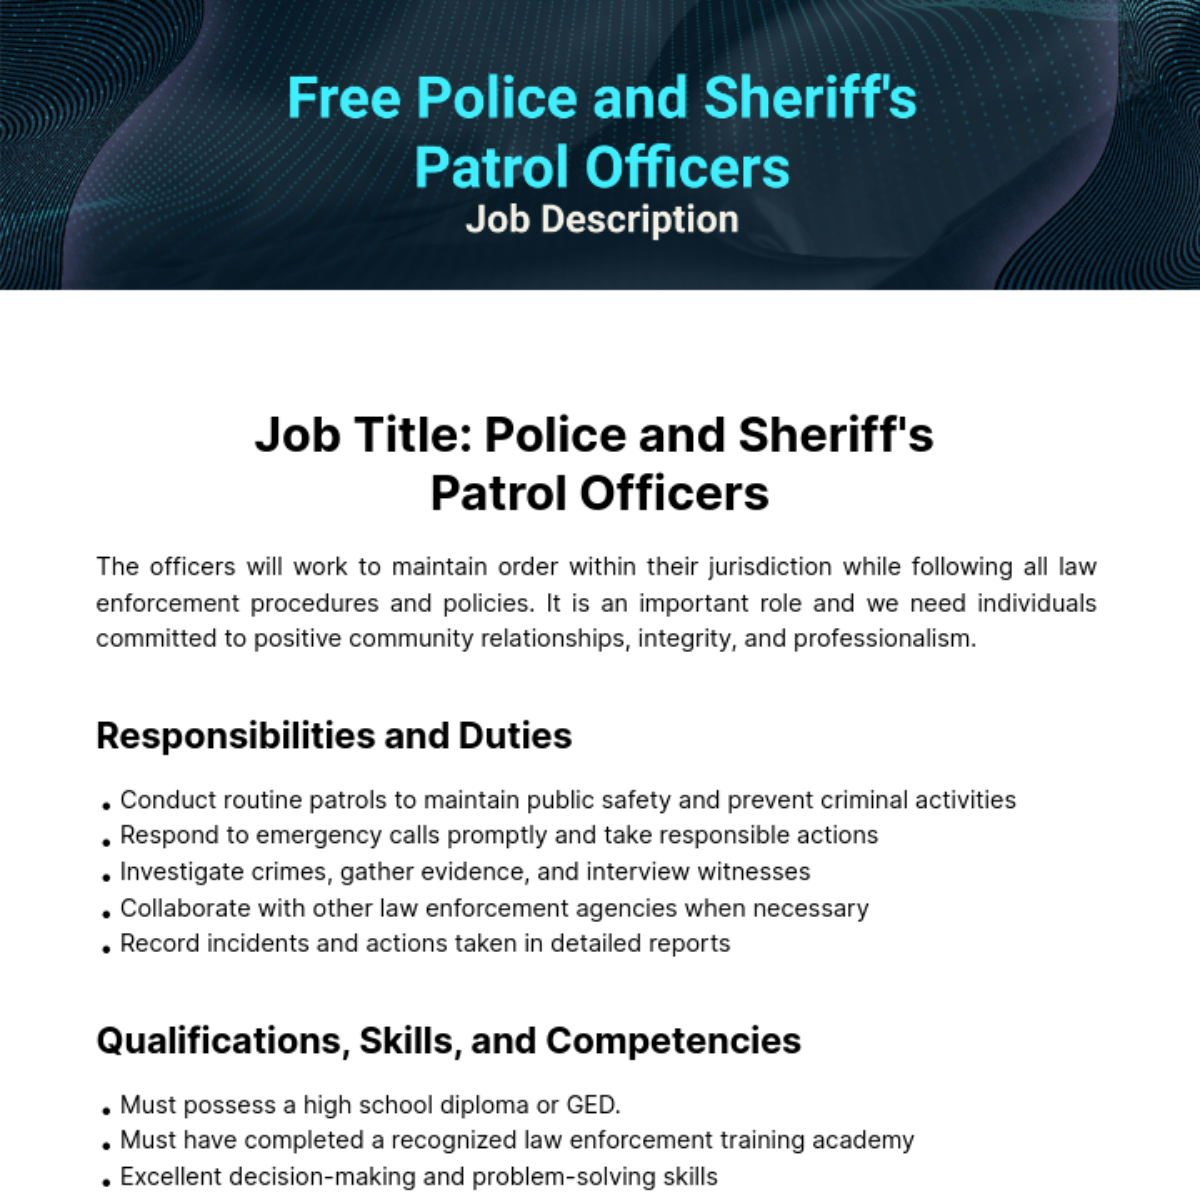 Free Police and Sheriff's Patrol Officers Job Description Template